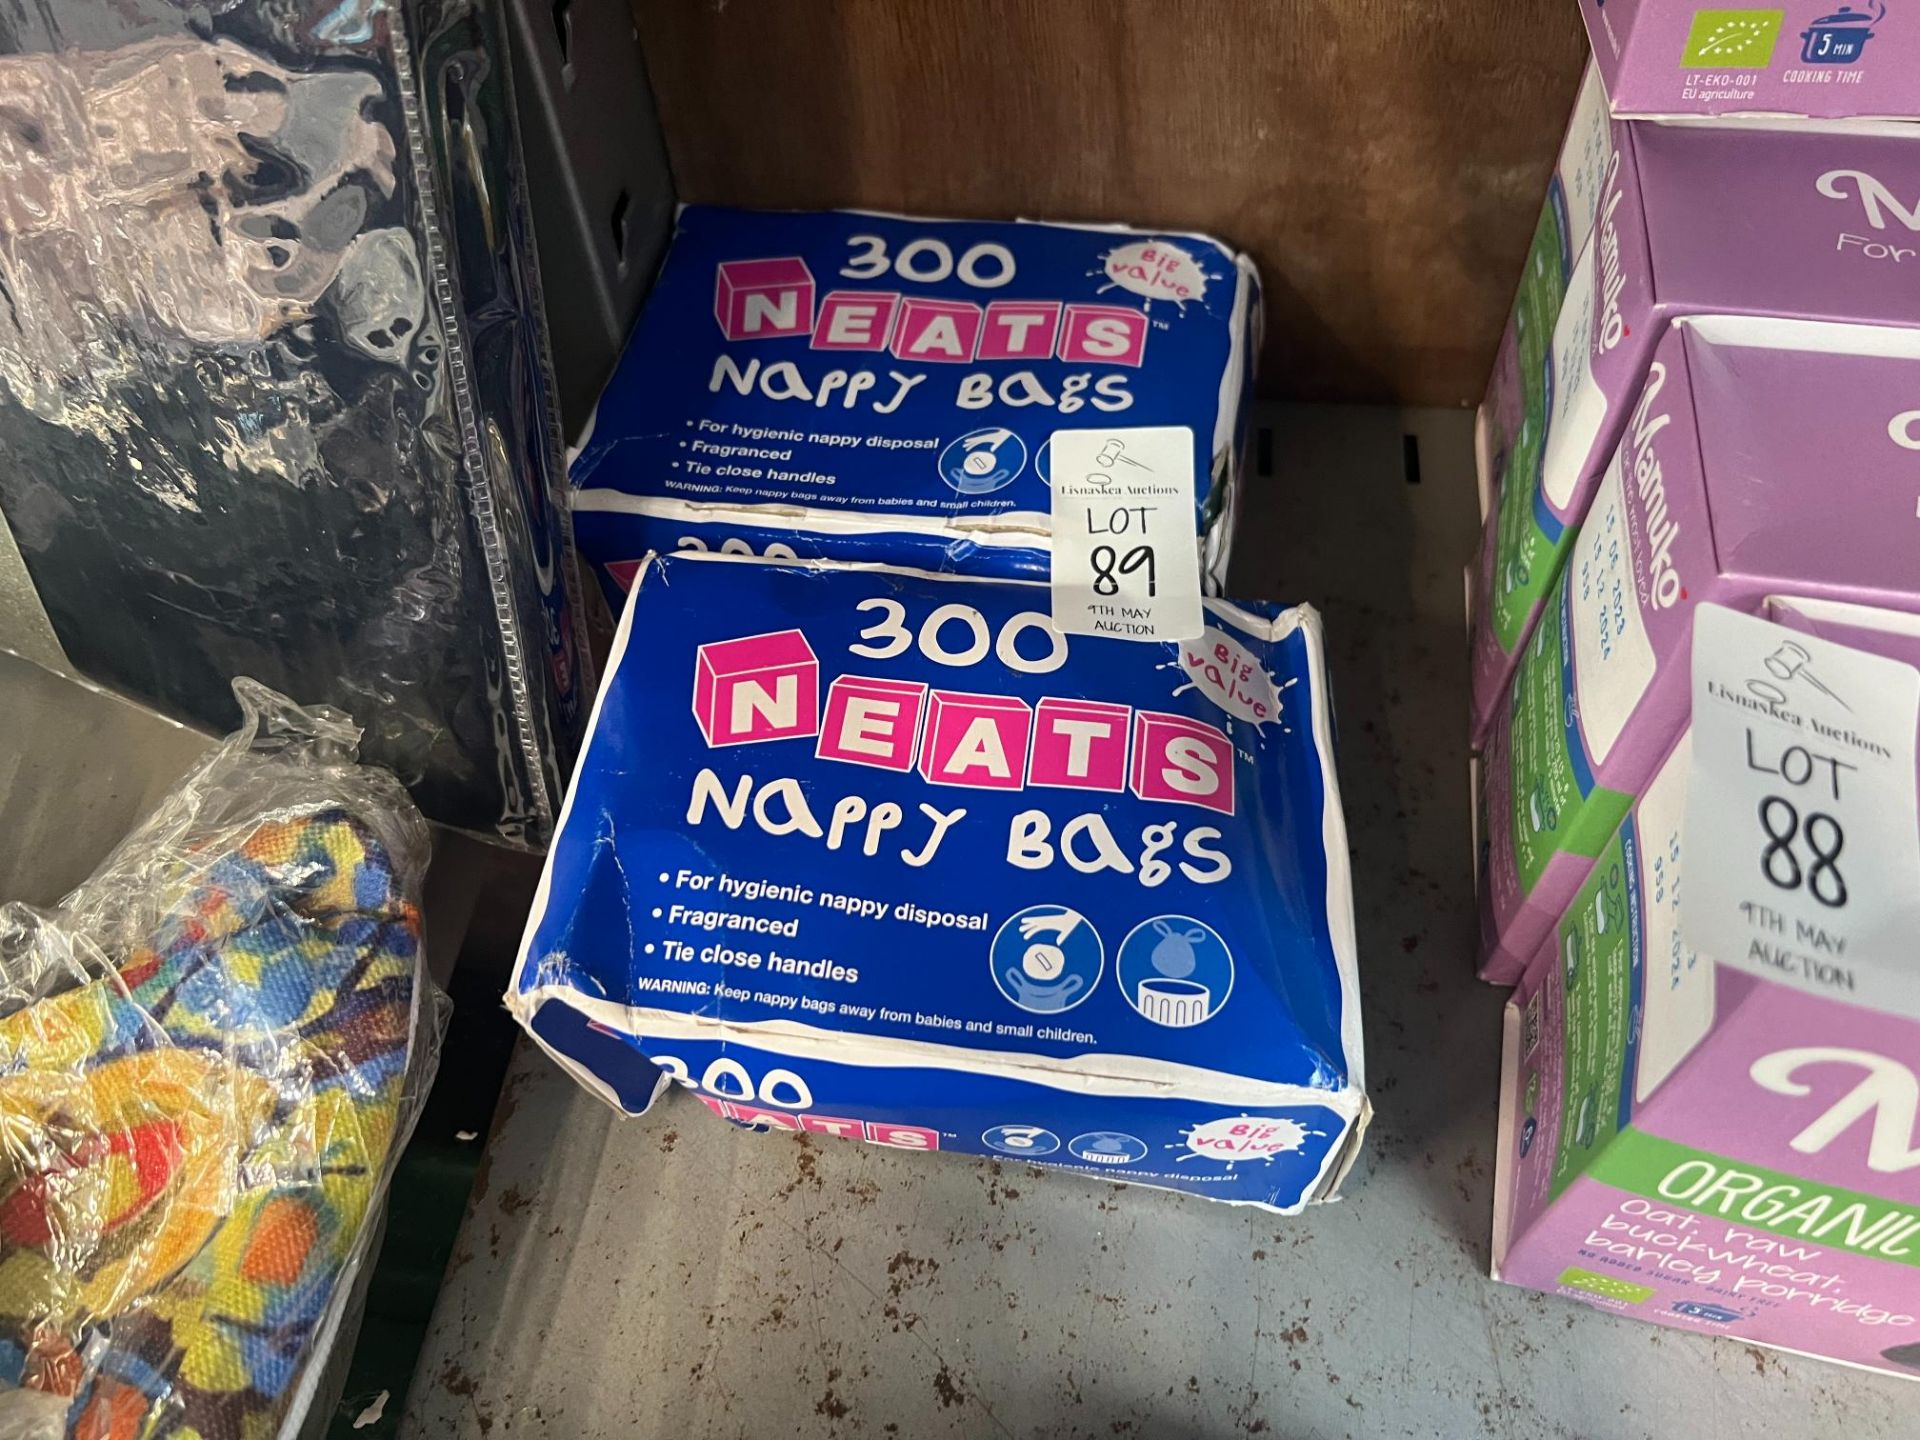 2X PACKS OF NEATS NAPPY BAGS